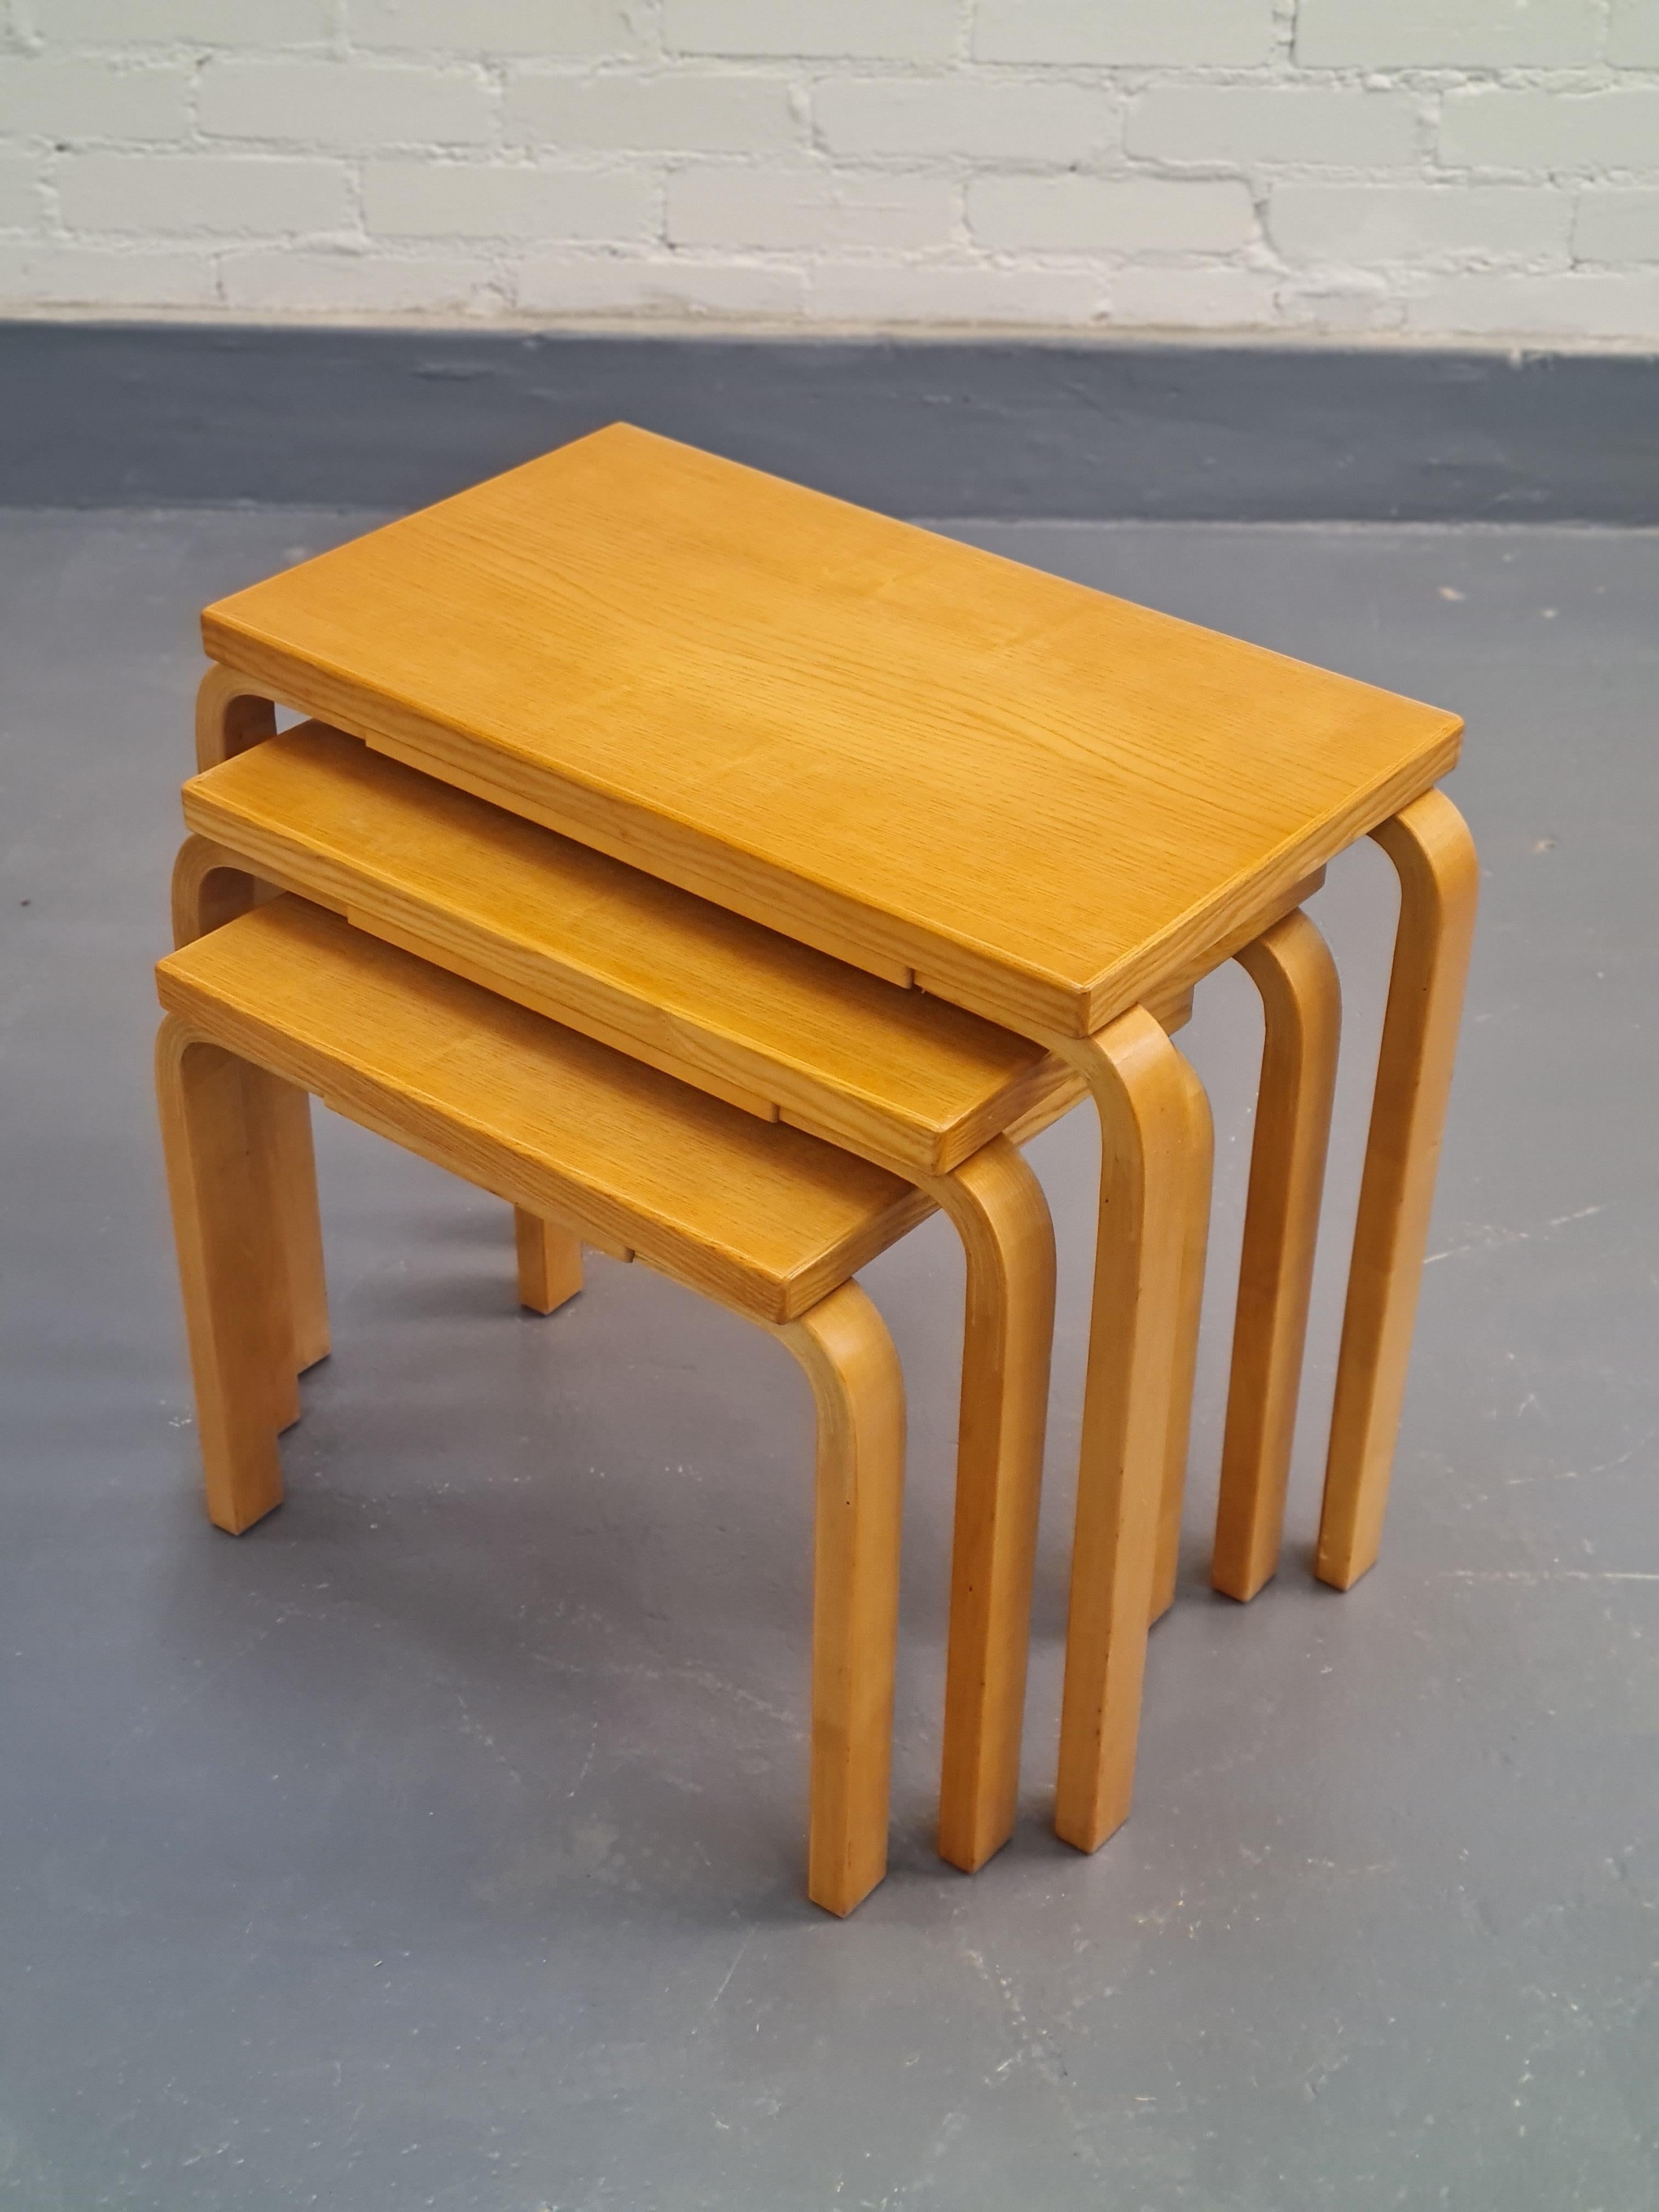 The perfect practical side table for any scandinavian or modern interior, especially with challenging spaces as you can save space with the nesting tables. Measuring 60x35, 52x35 and 44x35. 
The tables are in beautiful original condition and all